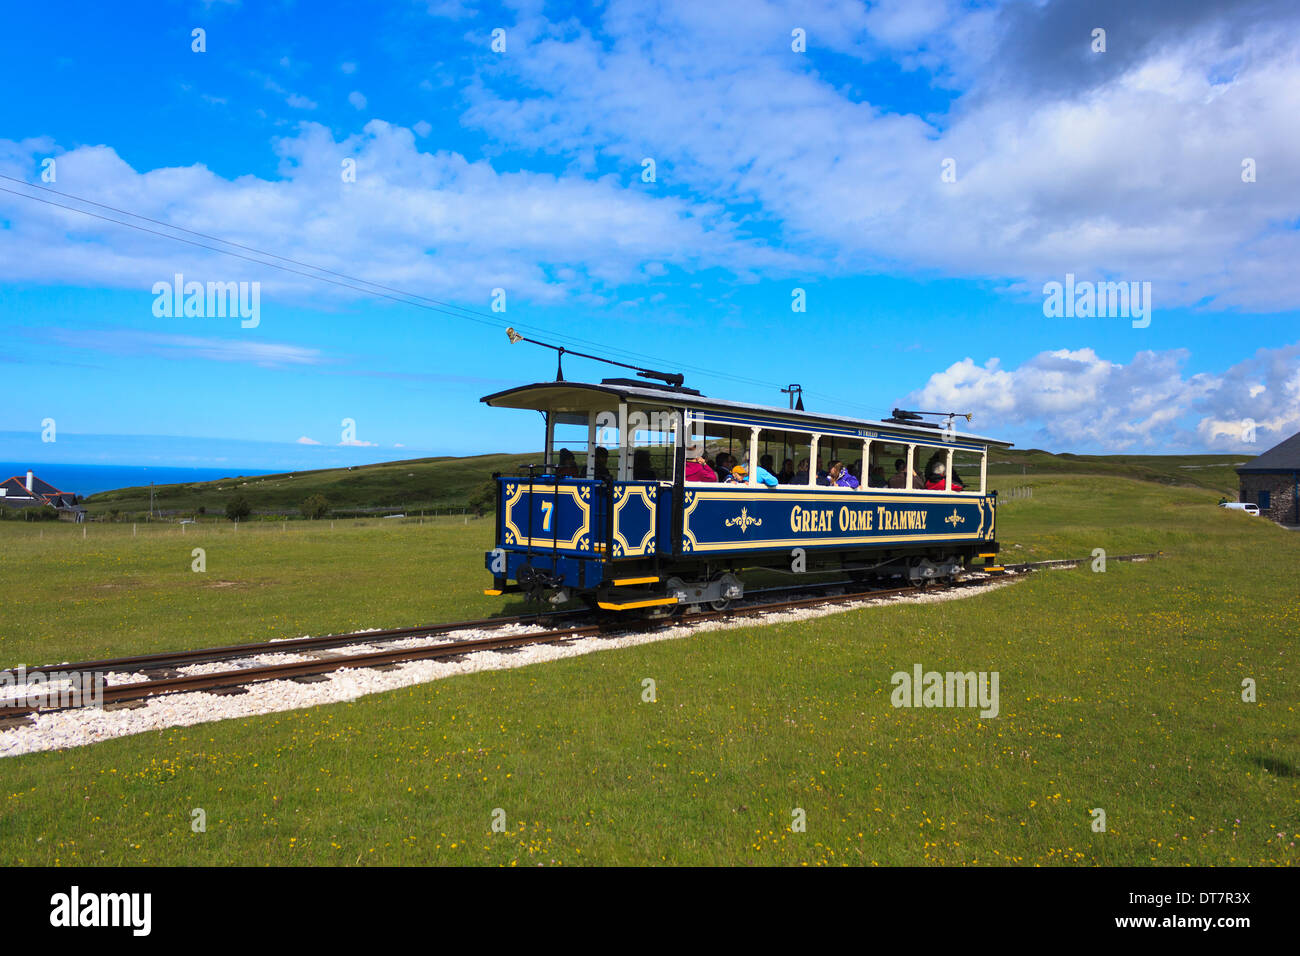 Tourists taking a ride on the Great Orme Tramway on top of the hill in the scenic seaside town of Llandudno, North Wales, UK. Stock Photo